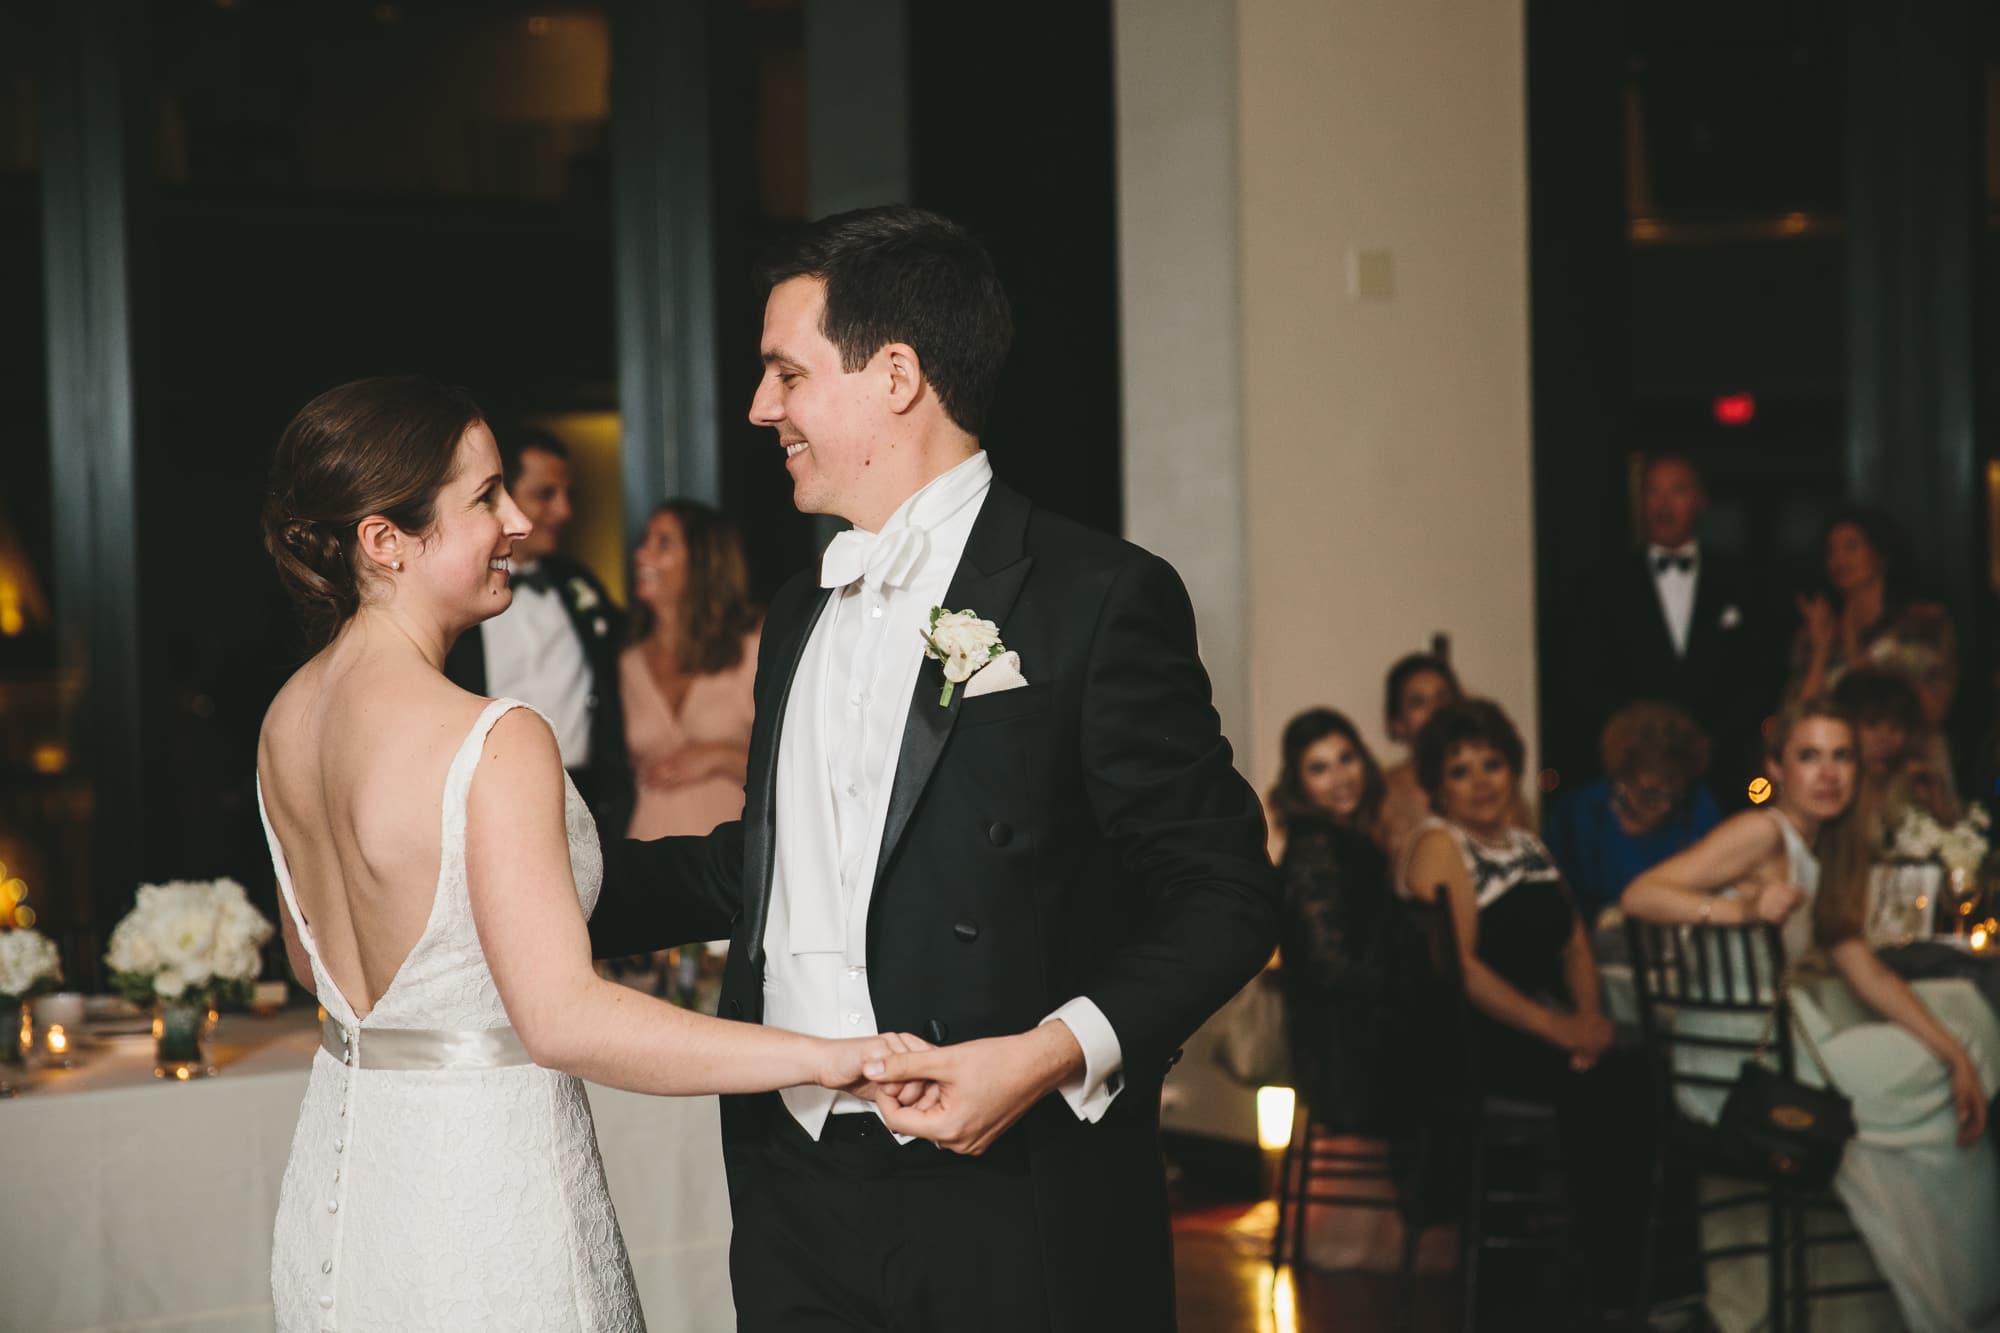 A bride and groom sharing a first dance at their State Room Wedding